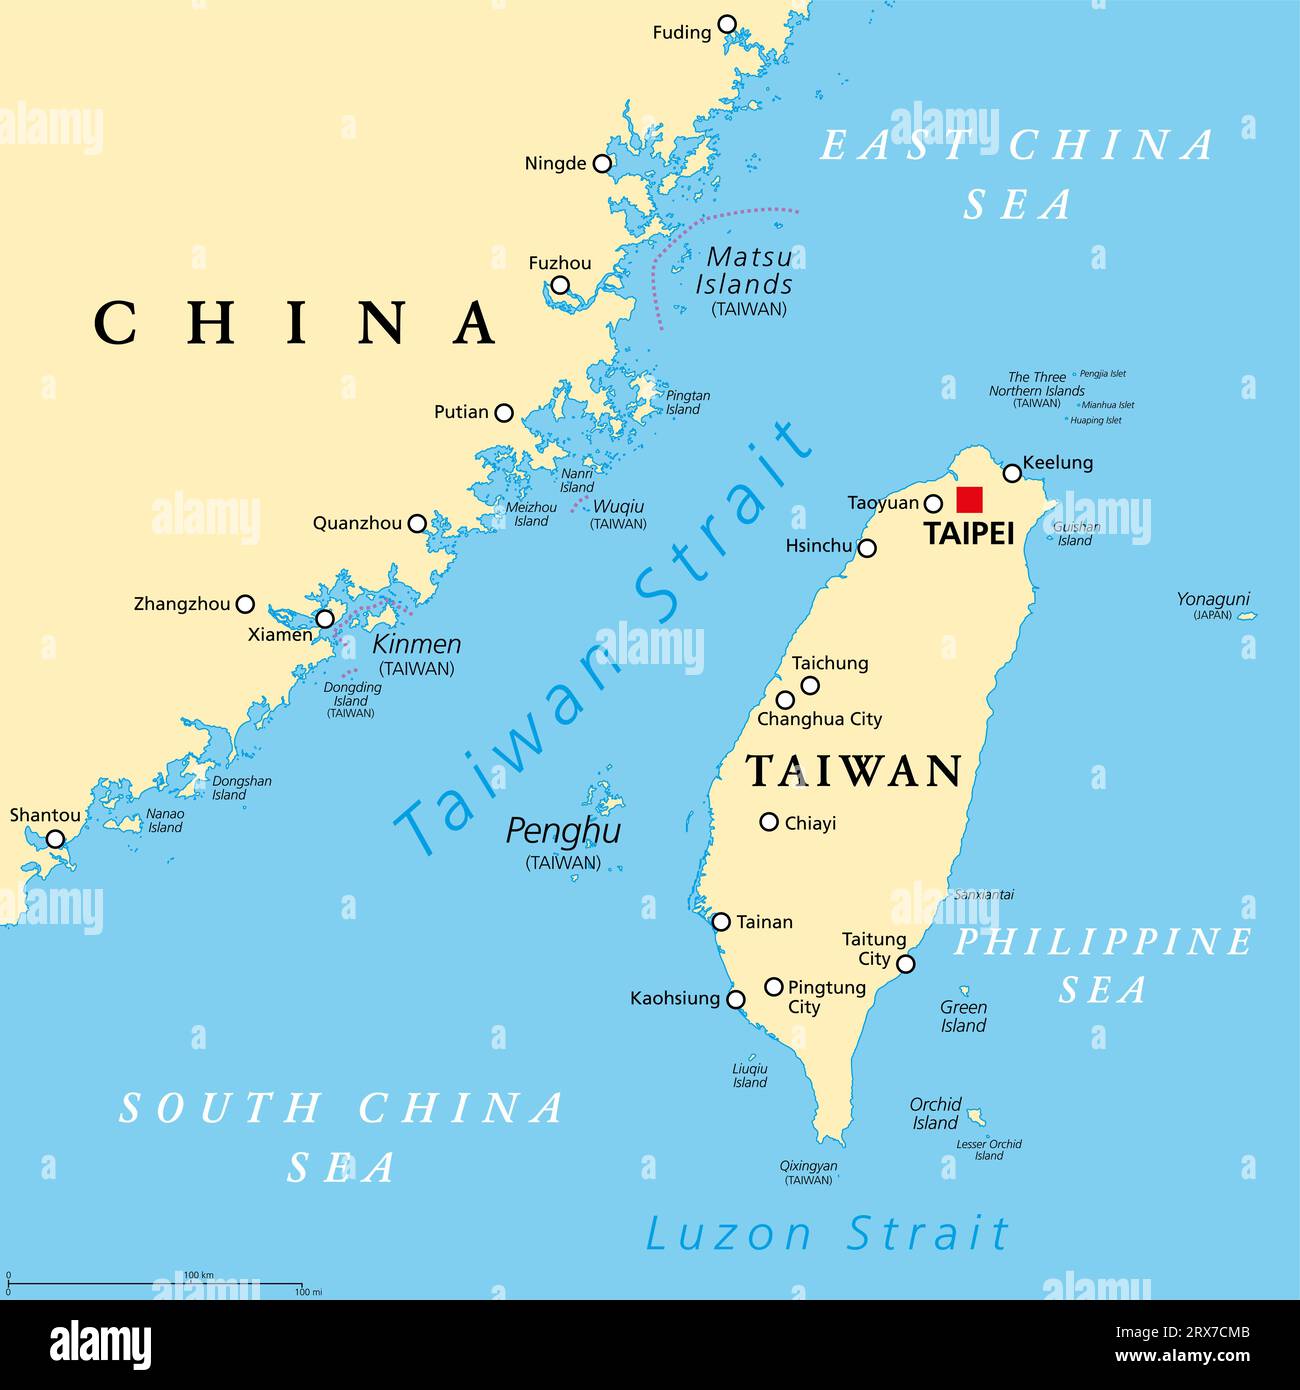 Taiwan Strait, political map. Important waterway and disputed international waters, separating the island of Taiwan and continental Asia. Stock Photo